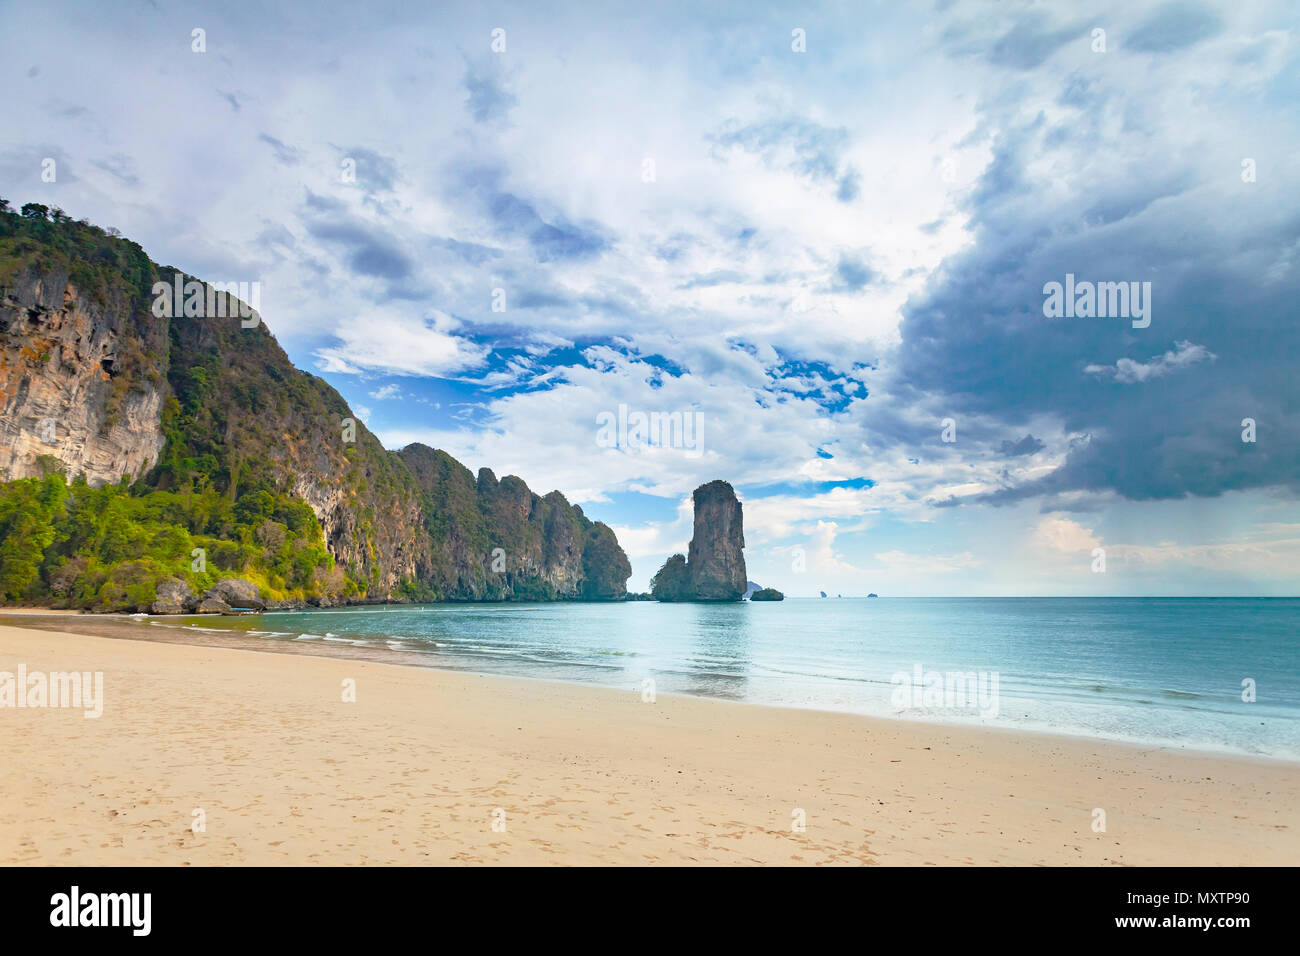 Stunning scene the limestone cliffs covered with the vegetation and the ocean shore on the cloudy sky background. Beauty of wild virgin Thai nature. Ideal place for the calm rest. Stock Photo